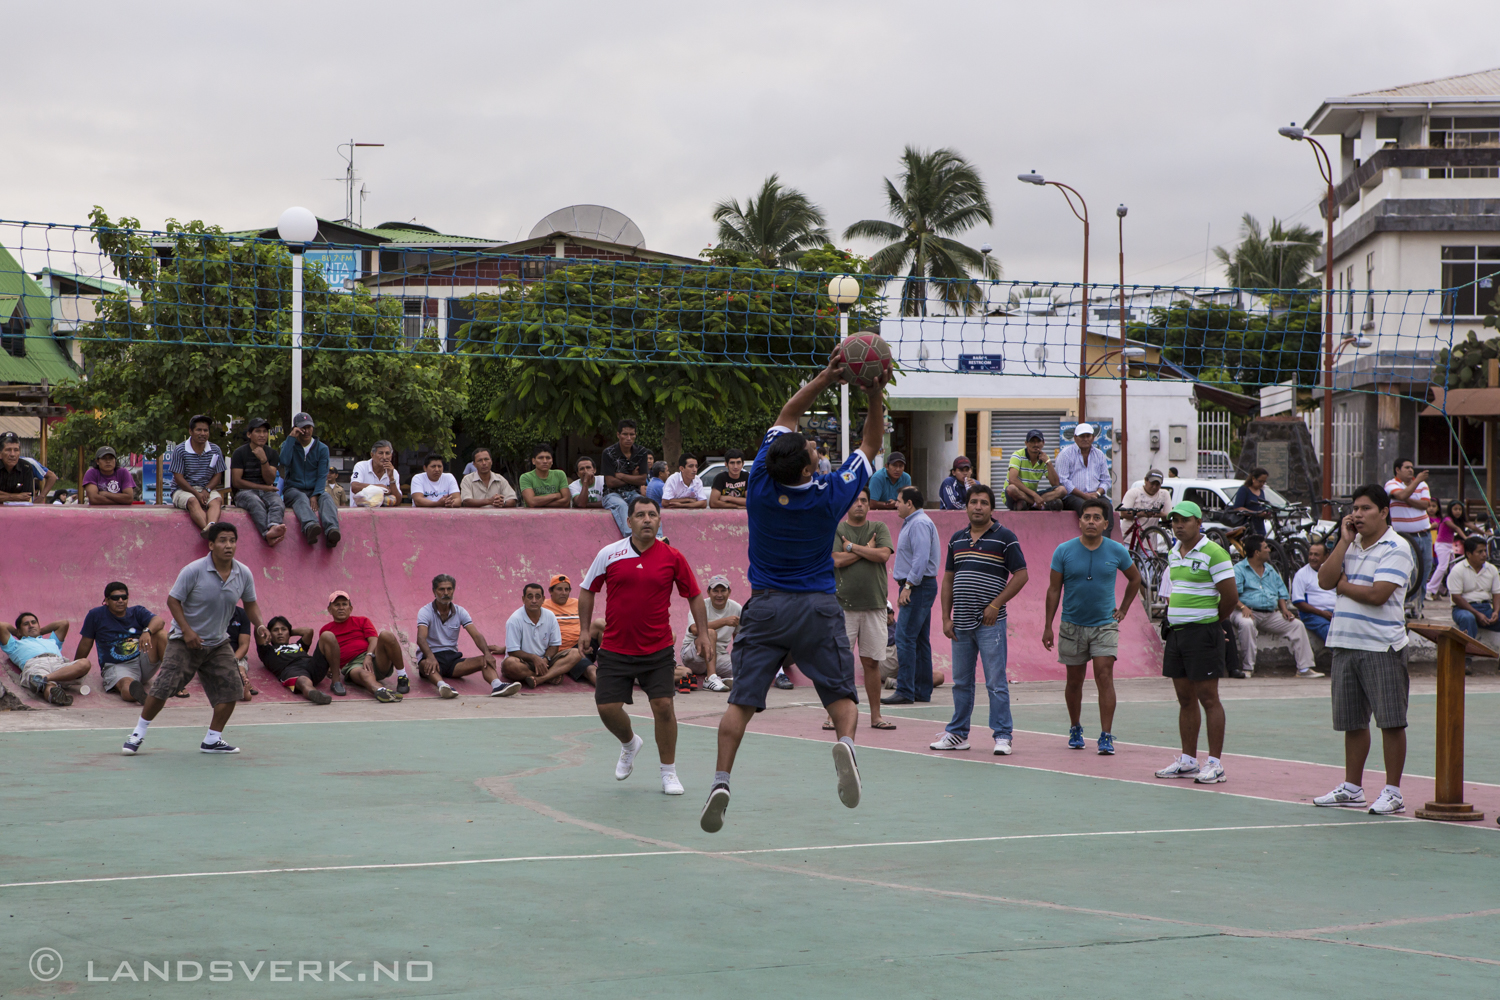 Playing some volley. Santa Cruz, Galapagos. A guy calling his bookie on the right hand side. 

(Canon EOS 5D Mark III / Canon EF 24-70mm f/2.8 L USM)